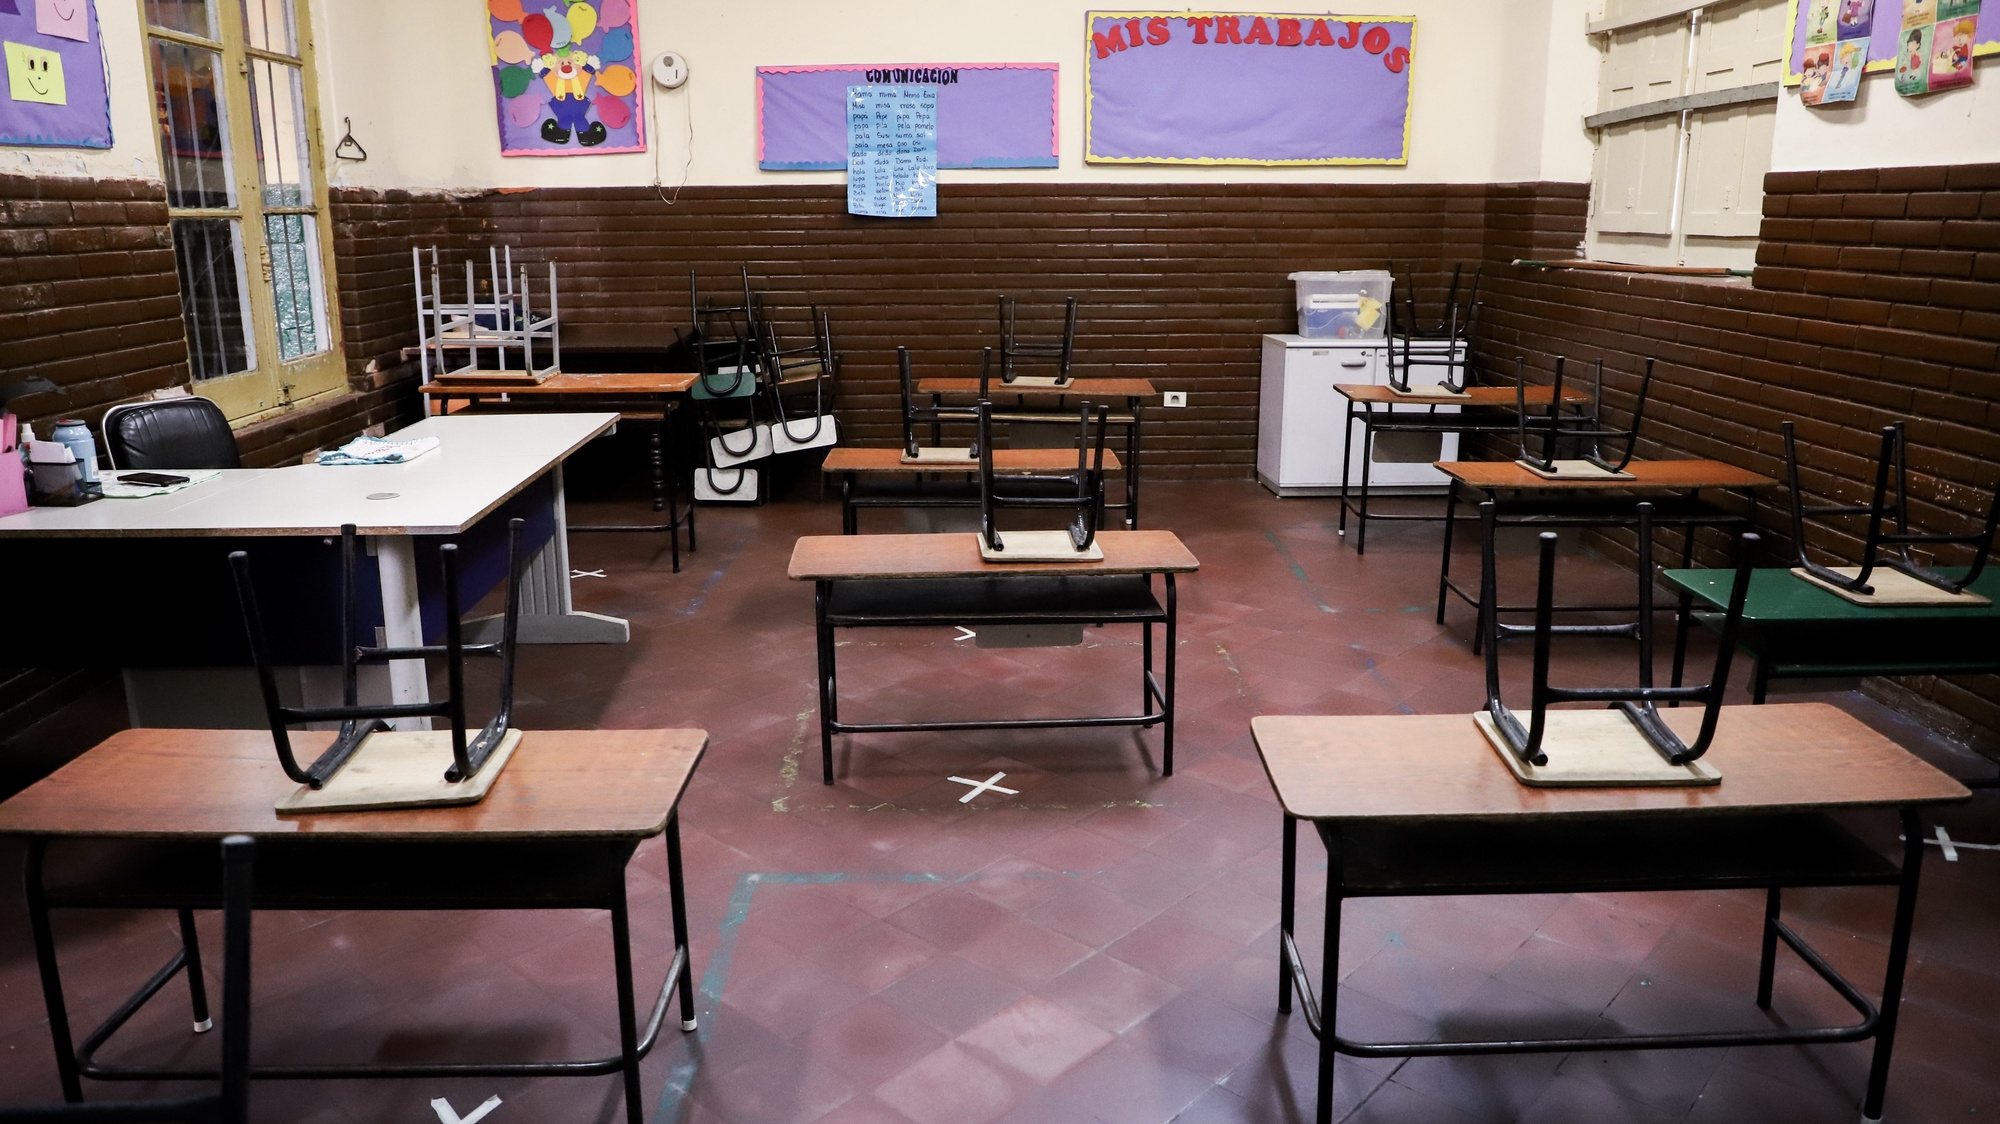 epa09775849 Desks placed within a distance from each other due to coronavirus at the Republic of  Brazil School, in Asuncion, Paraguay, 21 February 2022. Around 1.5 million students returned to school this Monday in Paraguay, which will seek to reinforce immunization against covid-19 in children from 5 years of age in the classroom.  EPA/Nathalia Aguilar